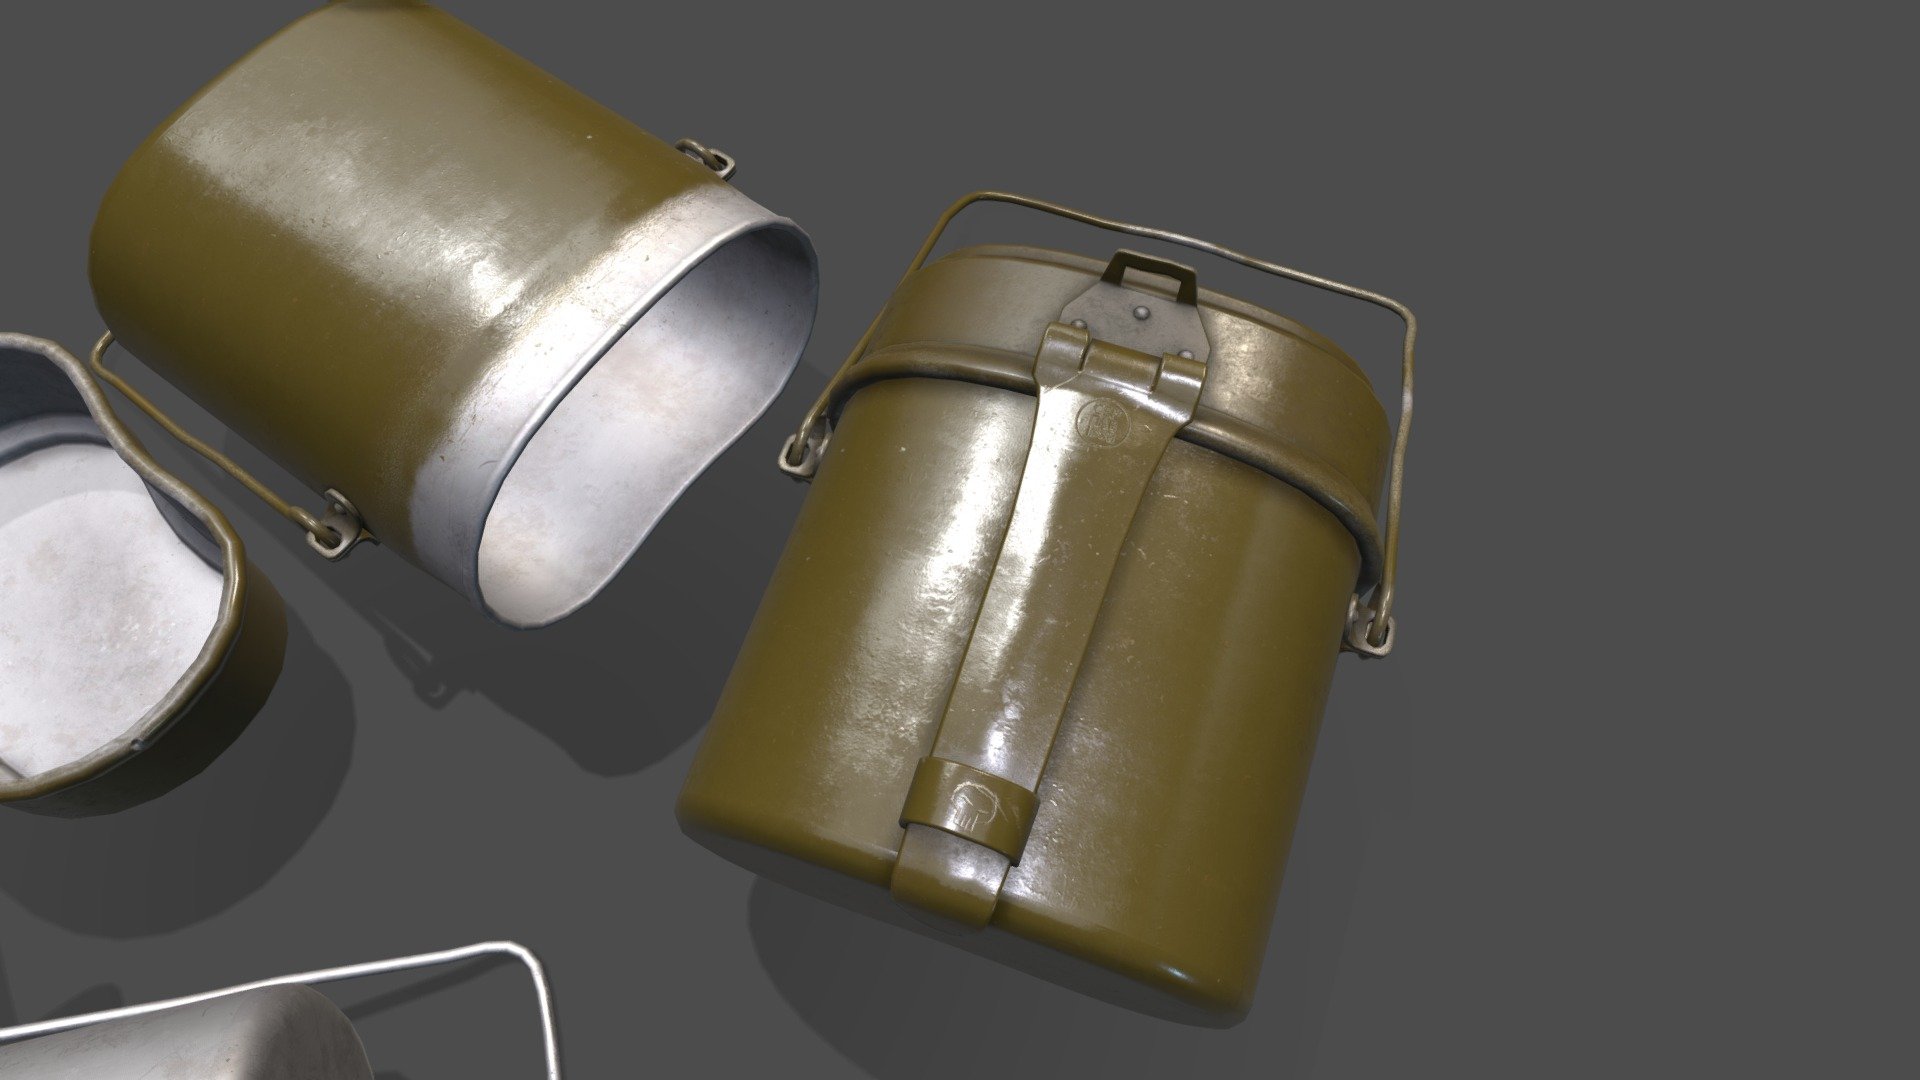 Russian &amp; Soviet Army Mess Kit Food Kettle Travel Pot.

1.3 L kettle with 0.5 L cover/frying pan.
150 x 100 x 170 mm. 
Very useful item for any outdoor activities 3d model